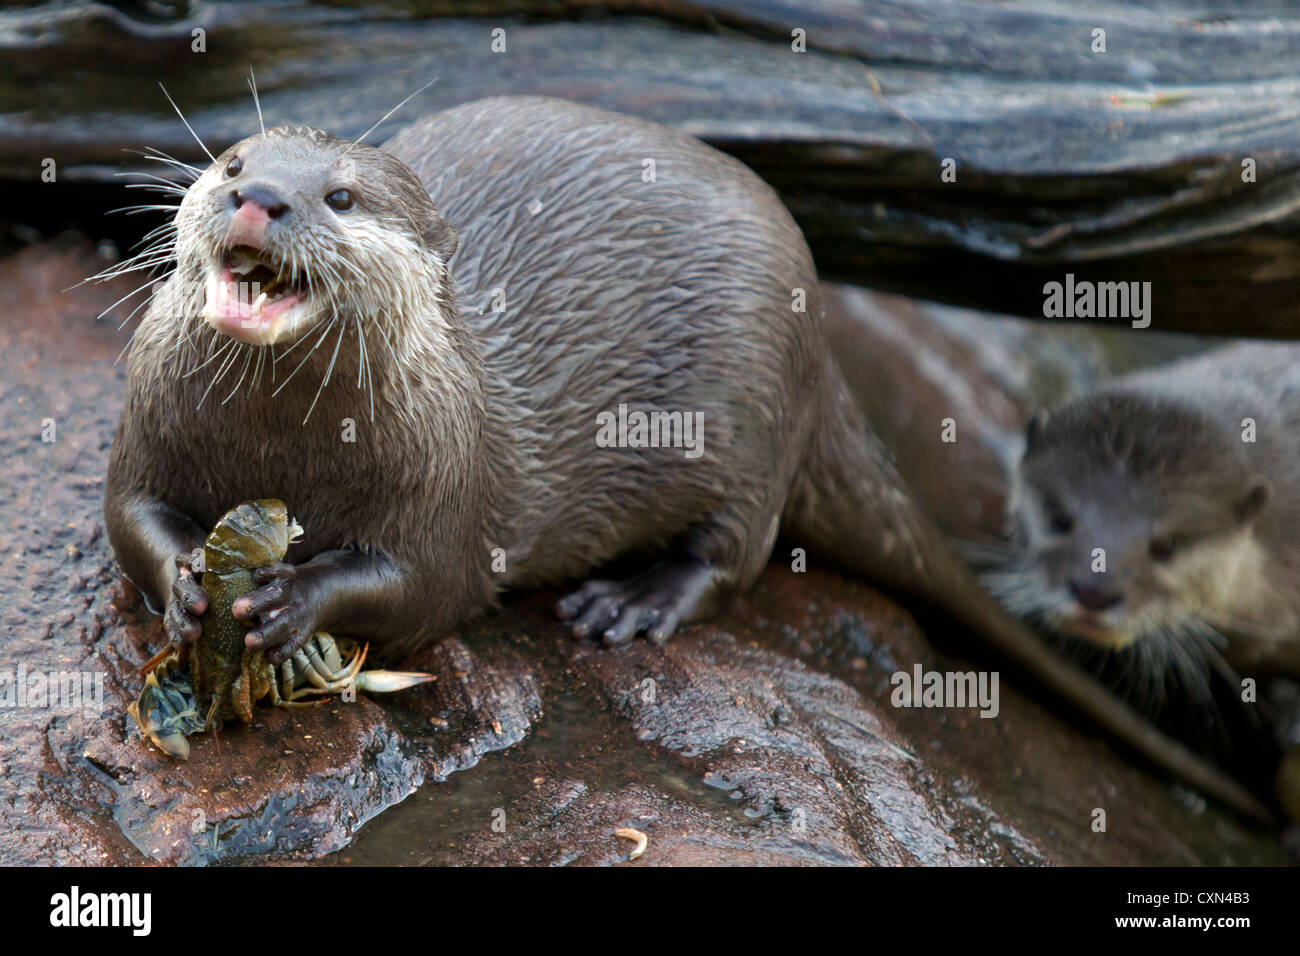 Oriental small-clawed otter (Aonyx cinerea), also known as the Asian small-clawed otter Stock Photo